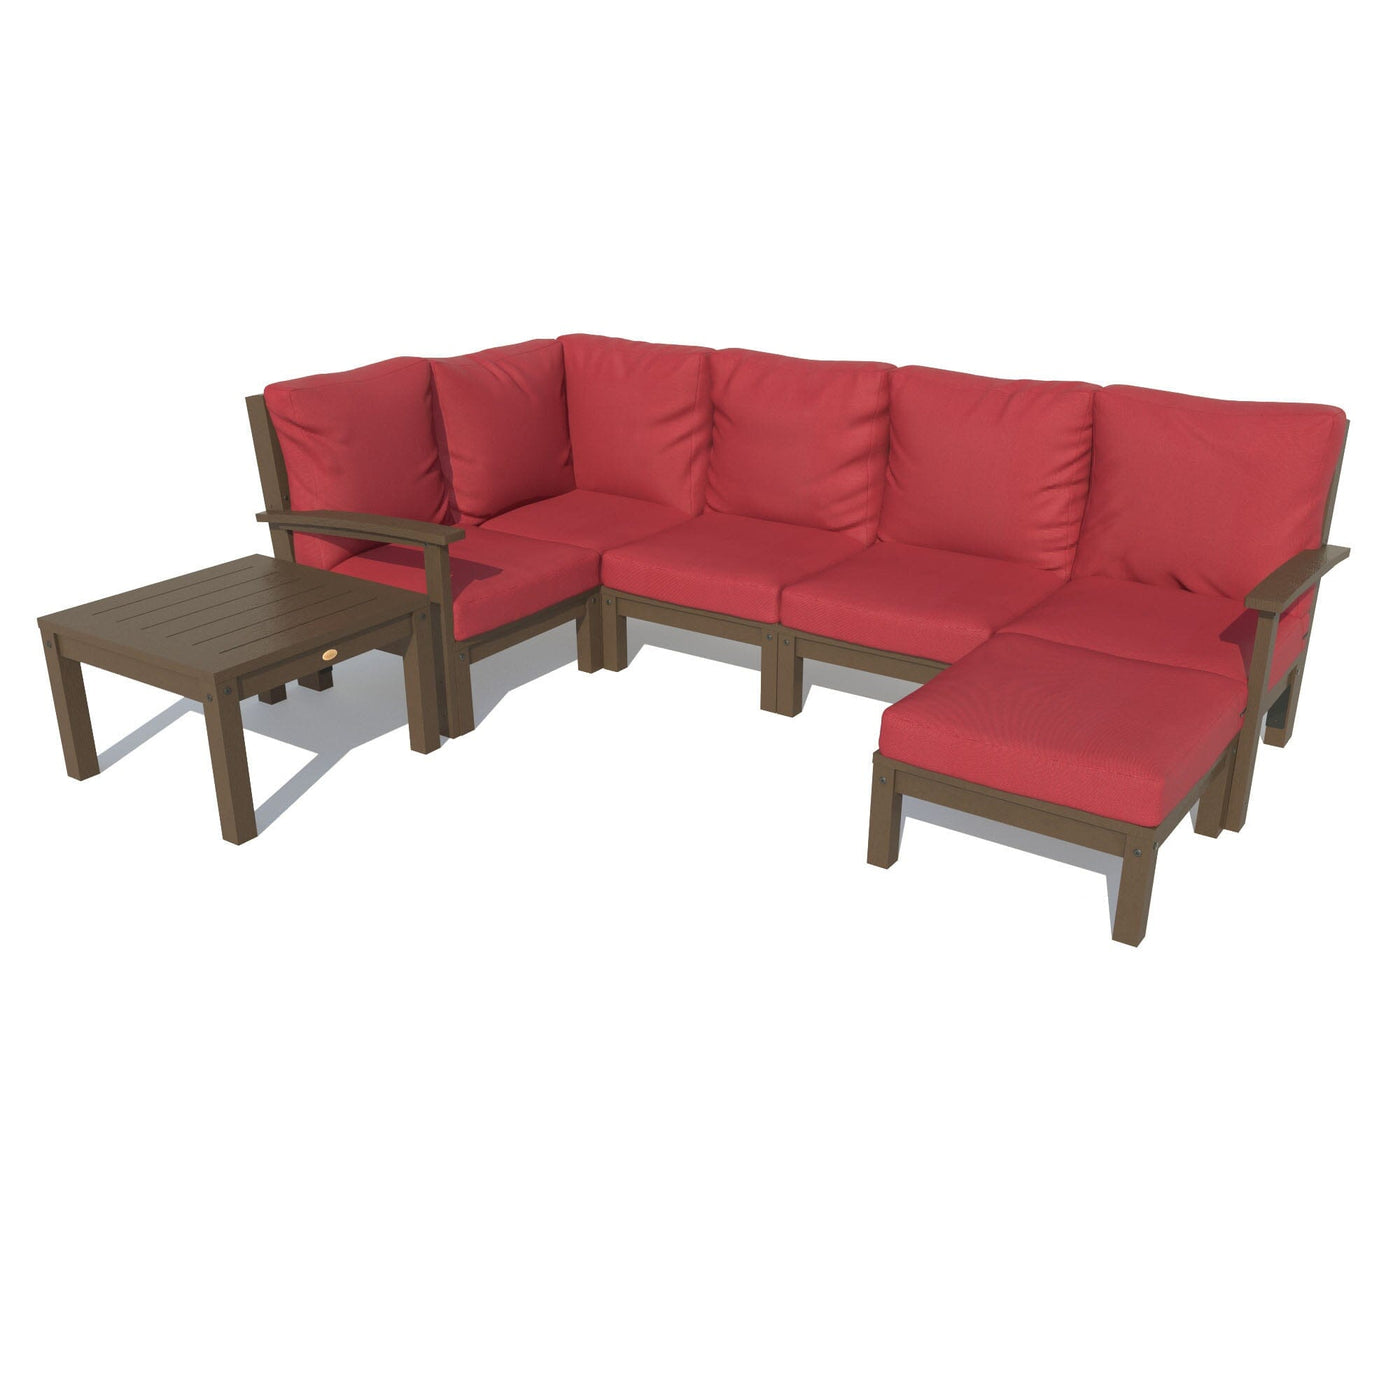 Bespoke Deep Seating: 7 Piece Sectional Set with Ottoman and Side Table Deep Seating Highwood USA Firecracker Red Weathered Acorn 